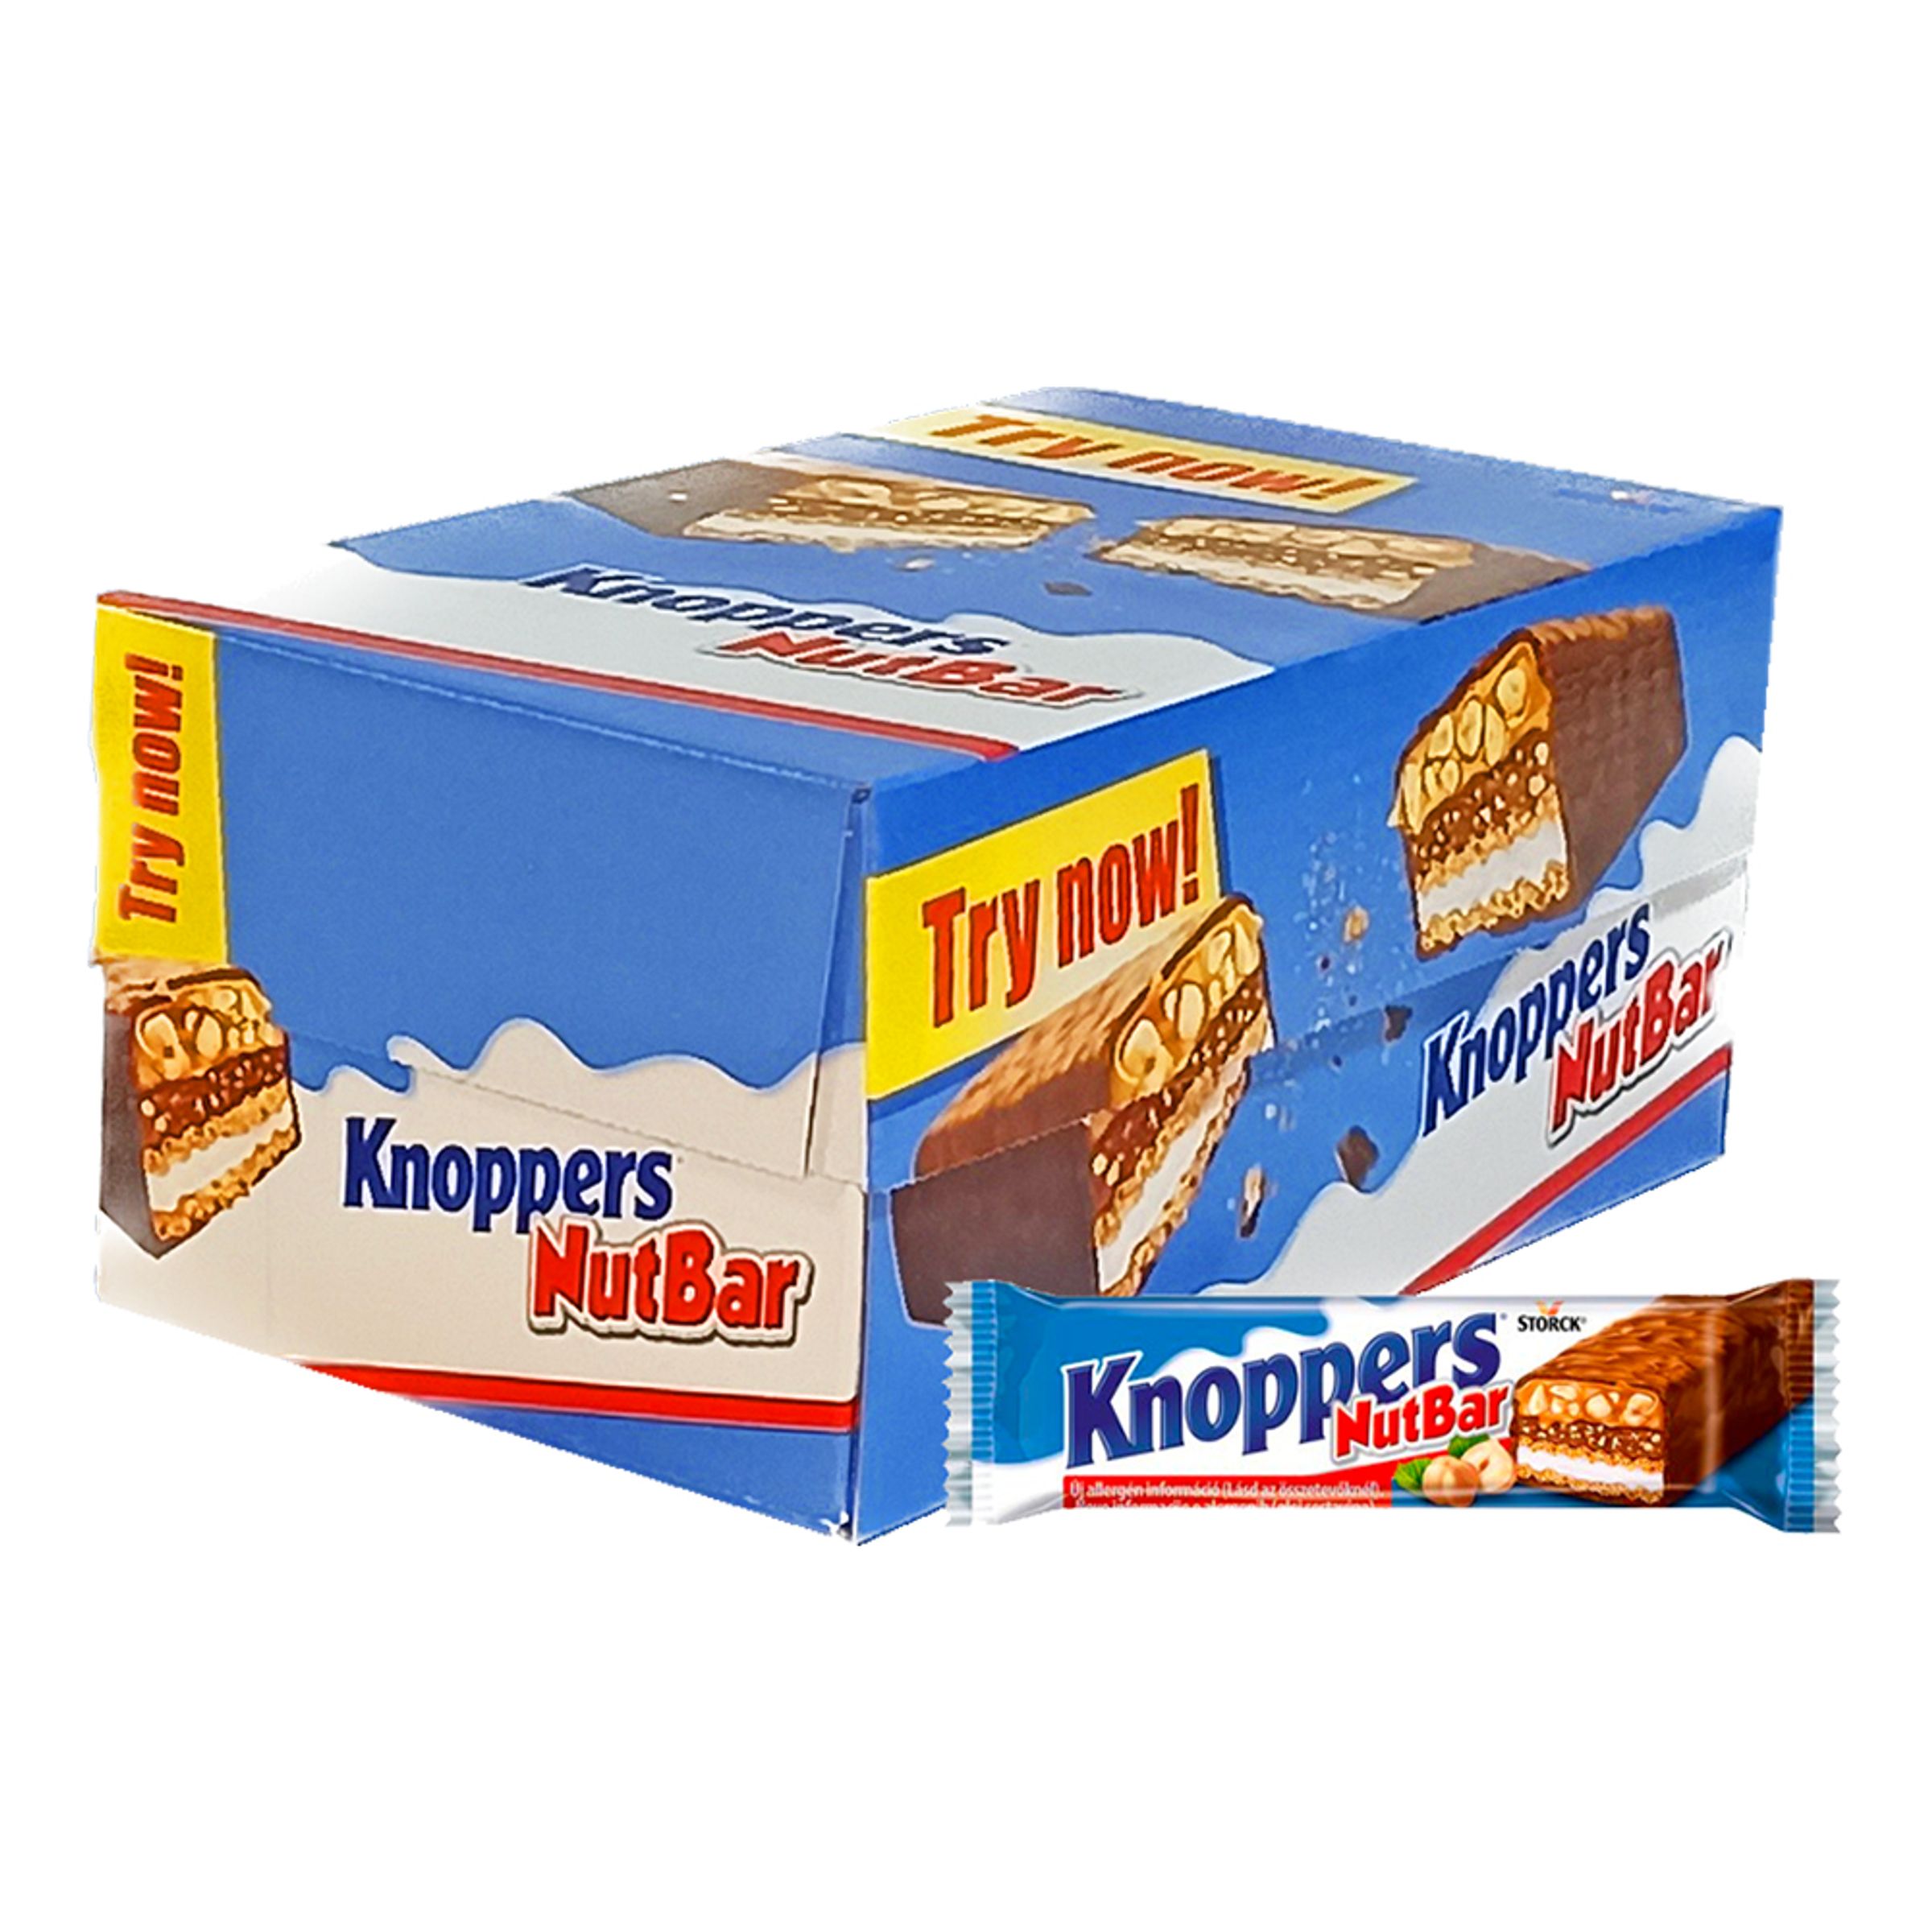 Knoppers NutBar Storpack - 24-pack